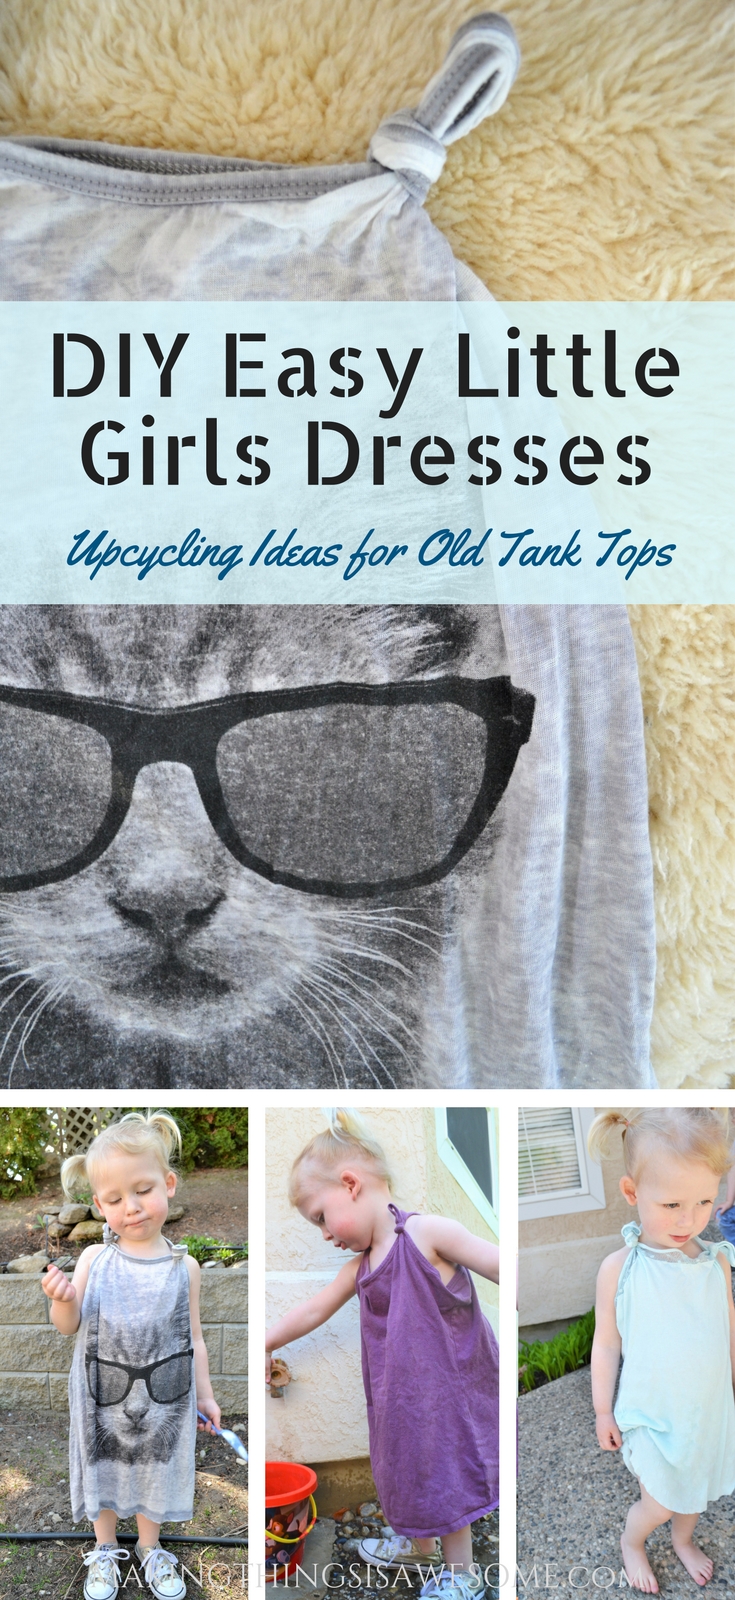 repurposed clothes kids diy easy little girls dresses makingthingsisawesome